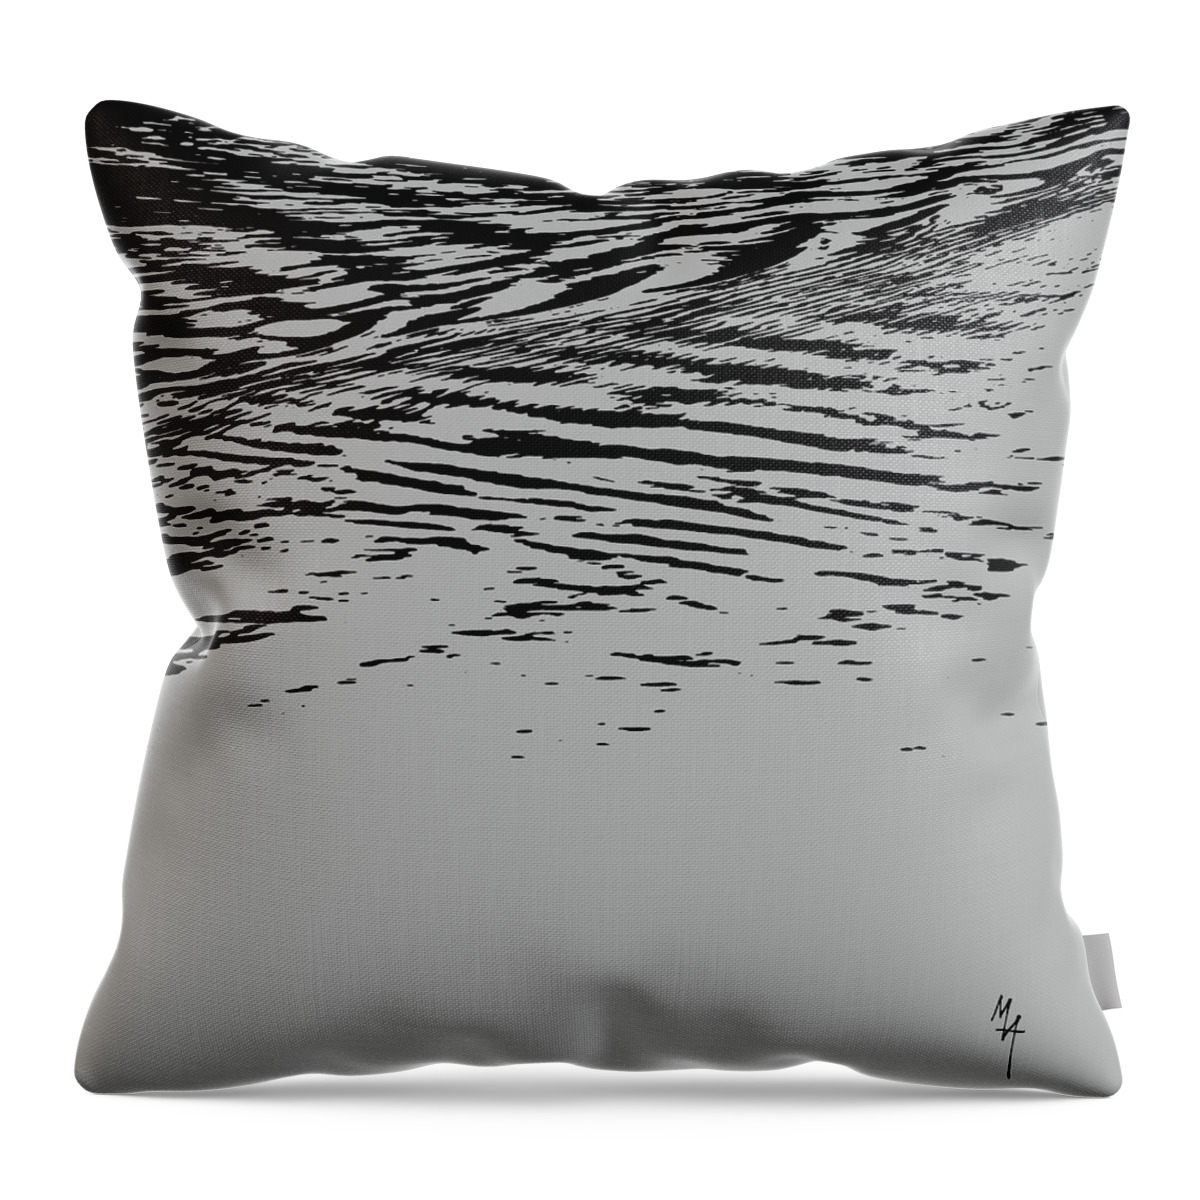 Two Currents Throw Pillow featuring the photograph Two Currents by Attila Meszlenyi